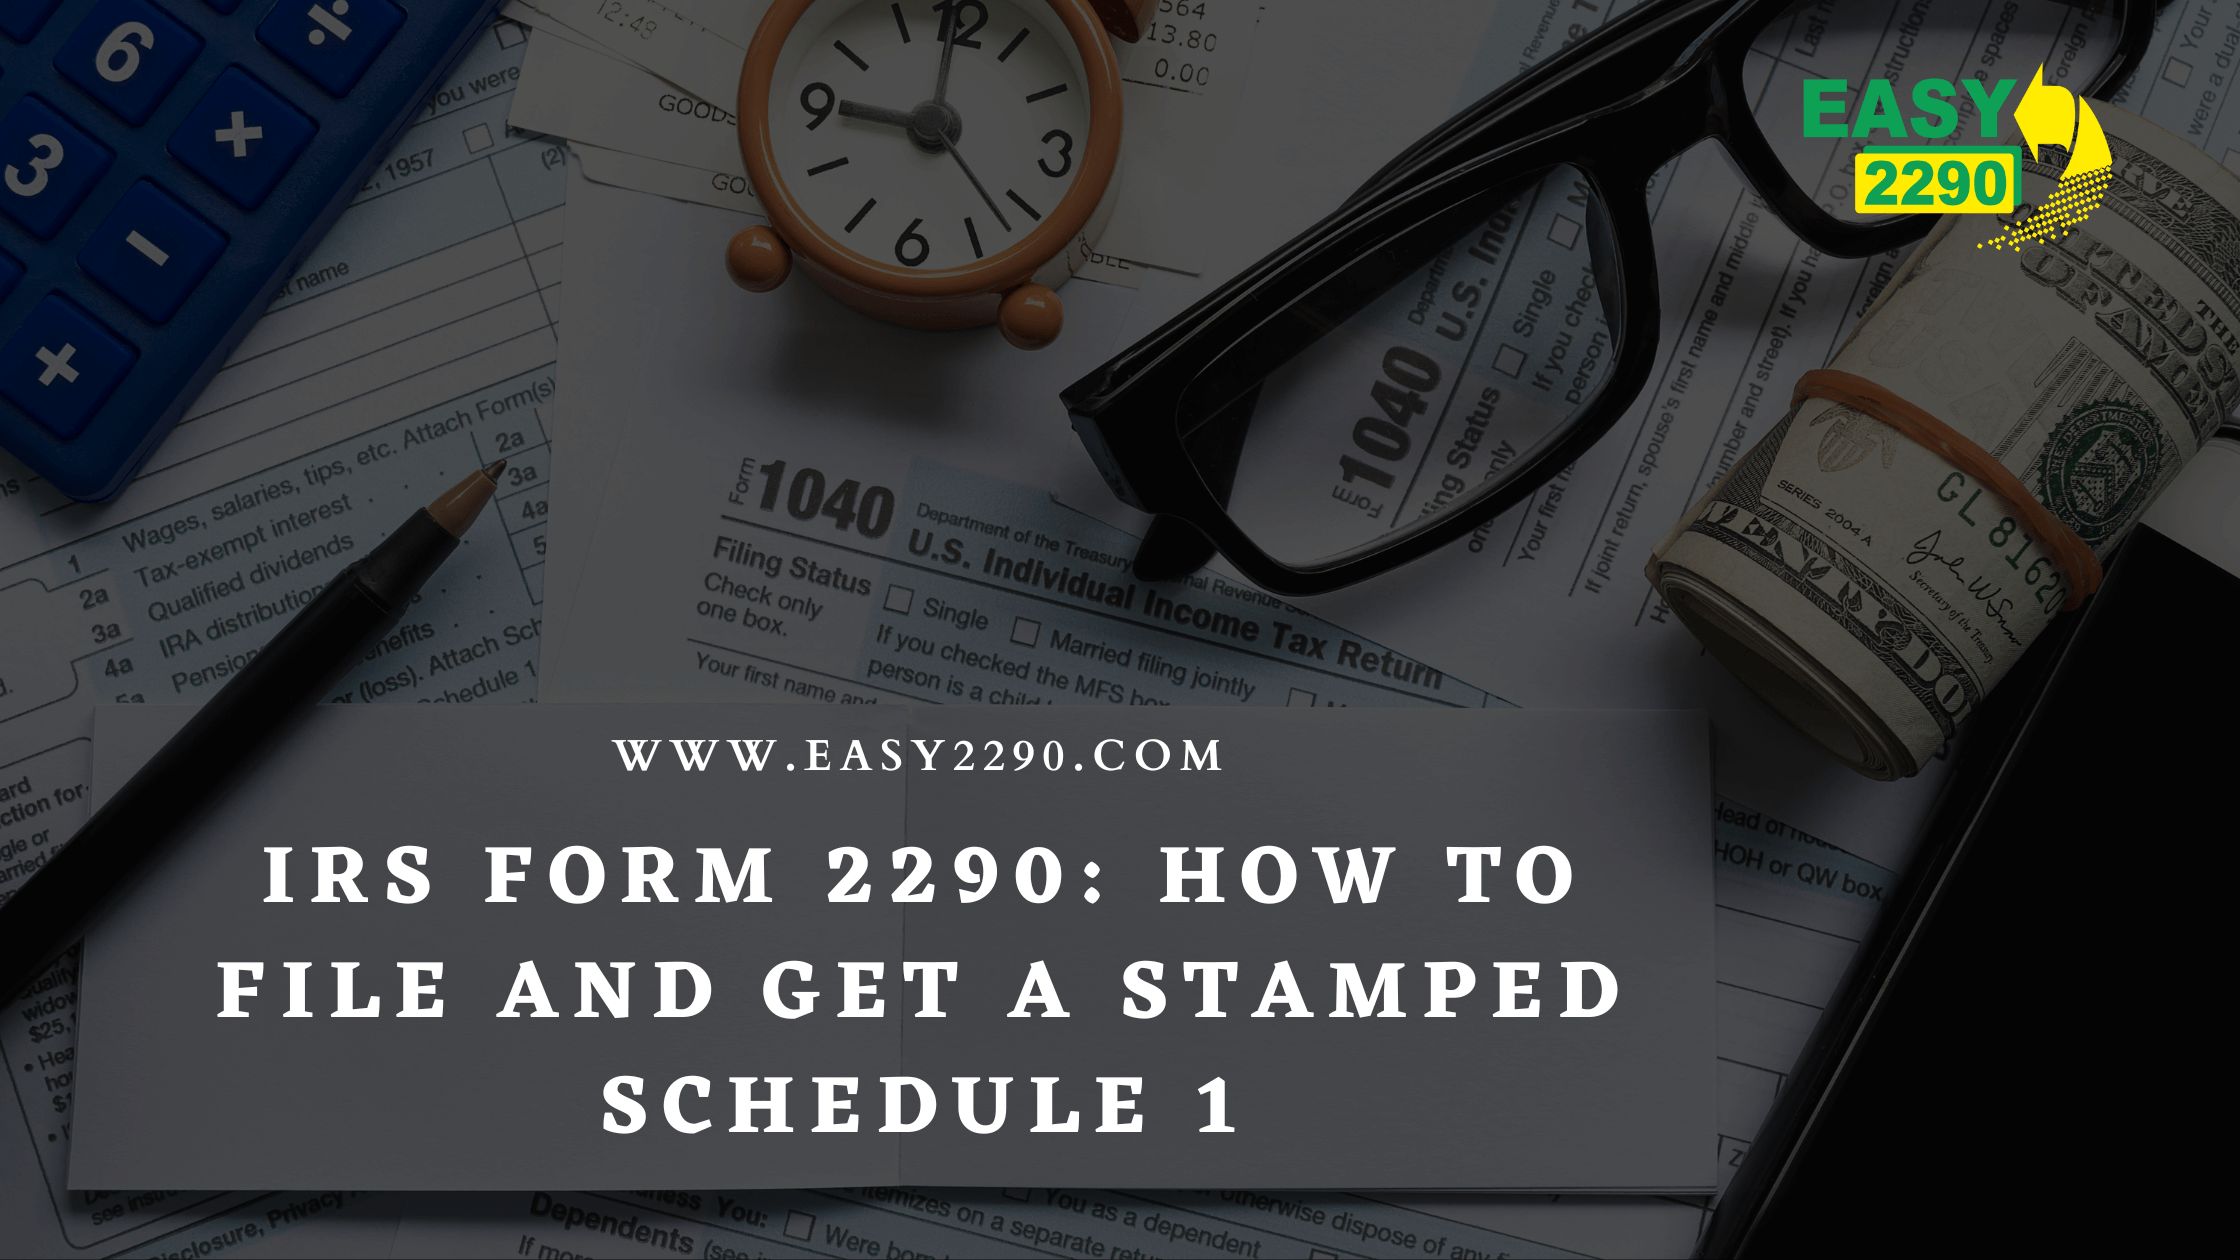 IRS Form 2290: How to File and Get a Stamped Schedule 1 